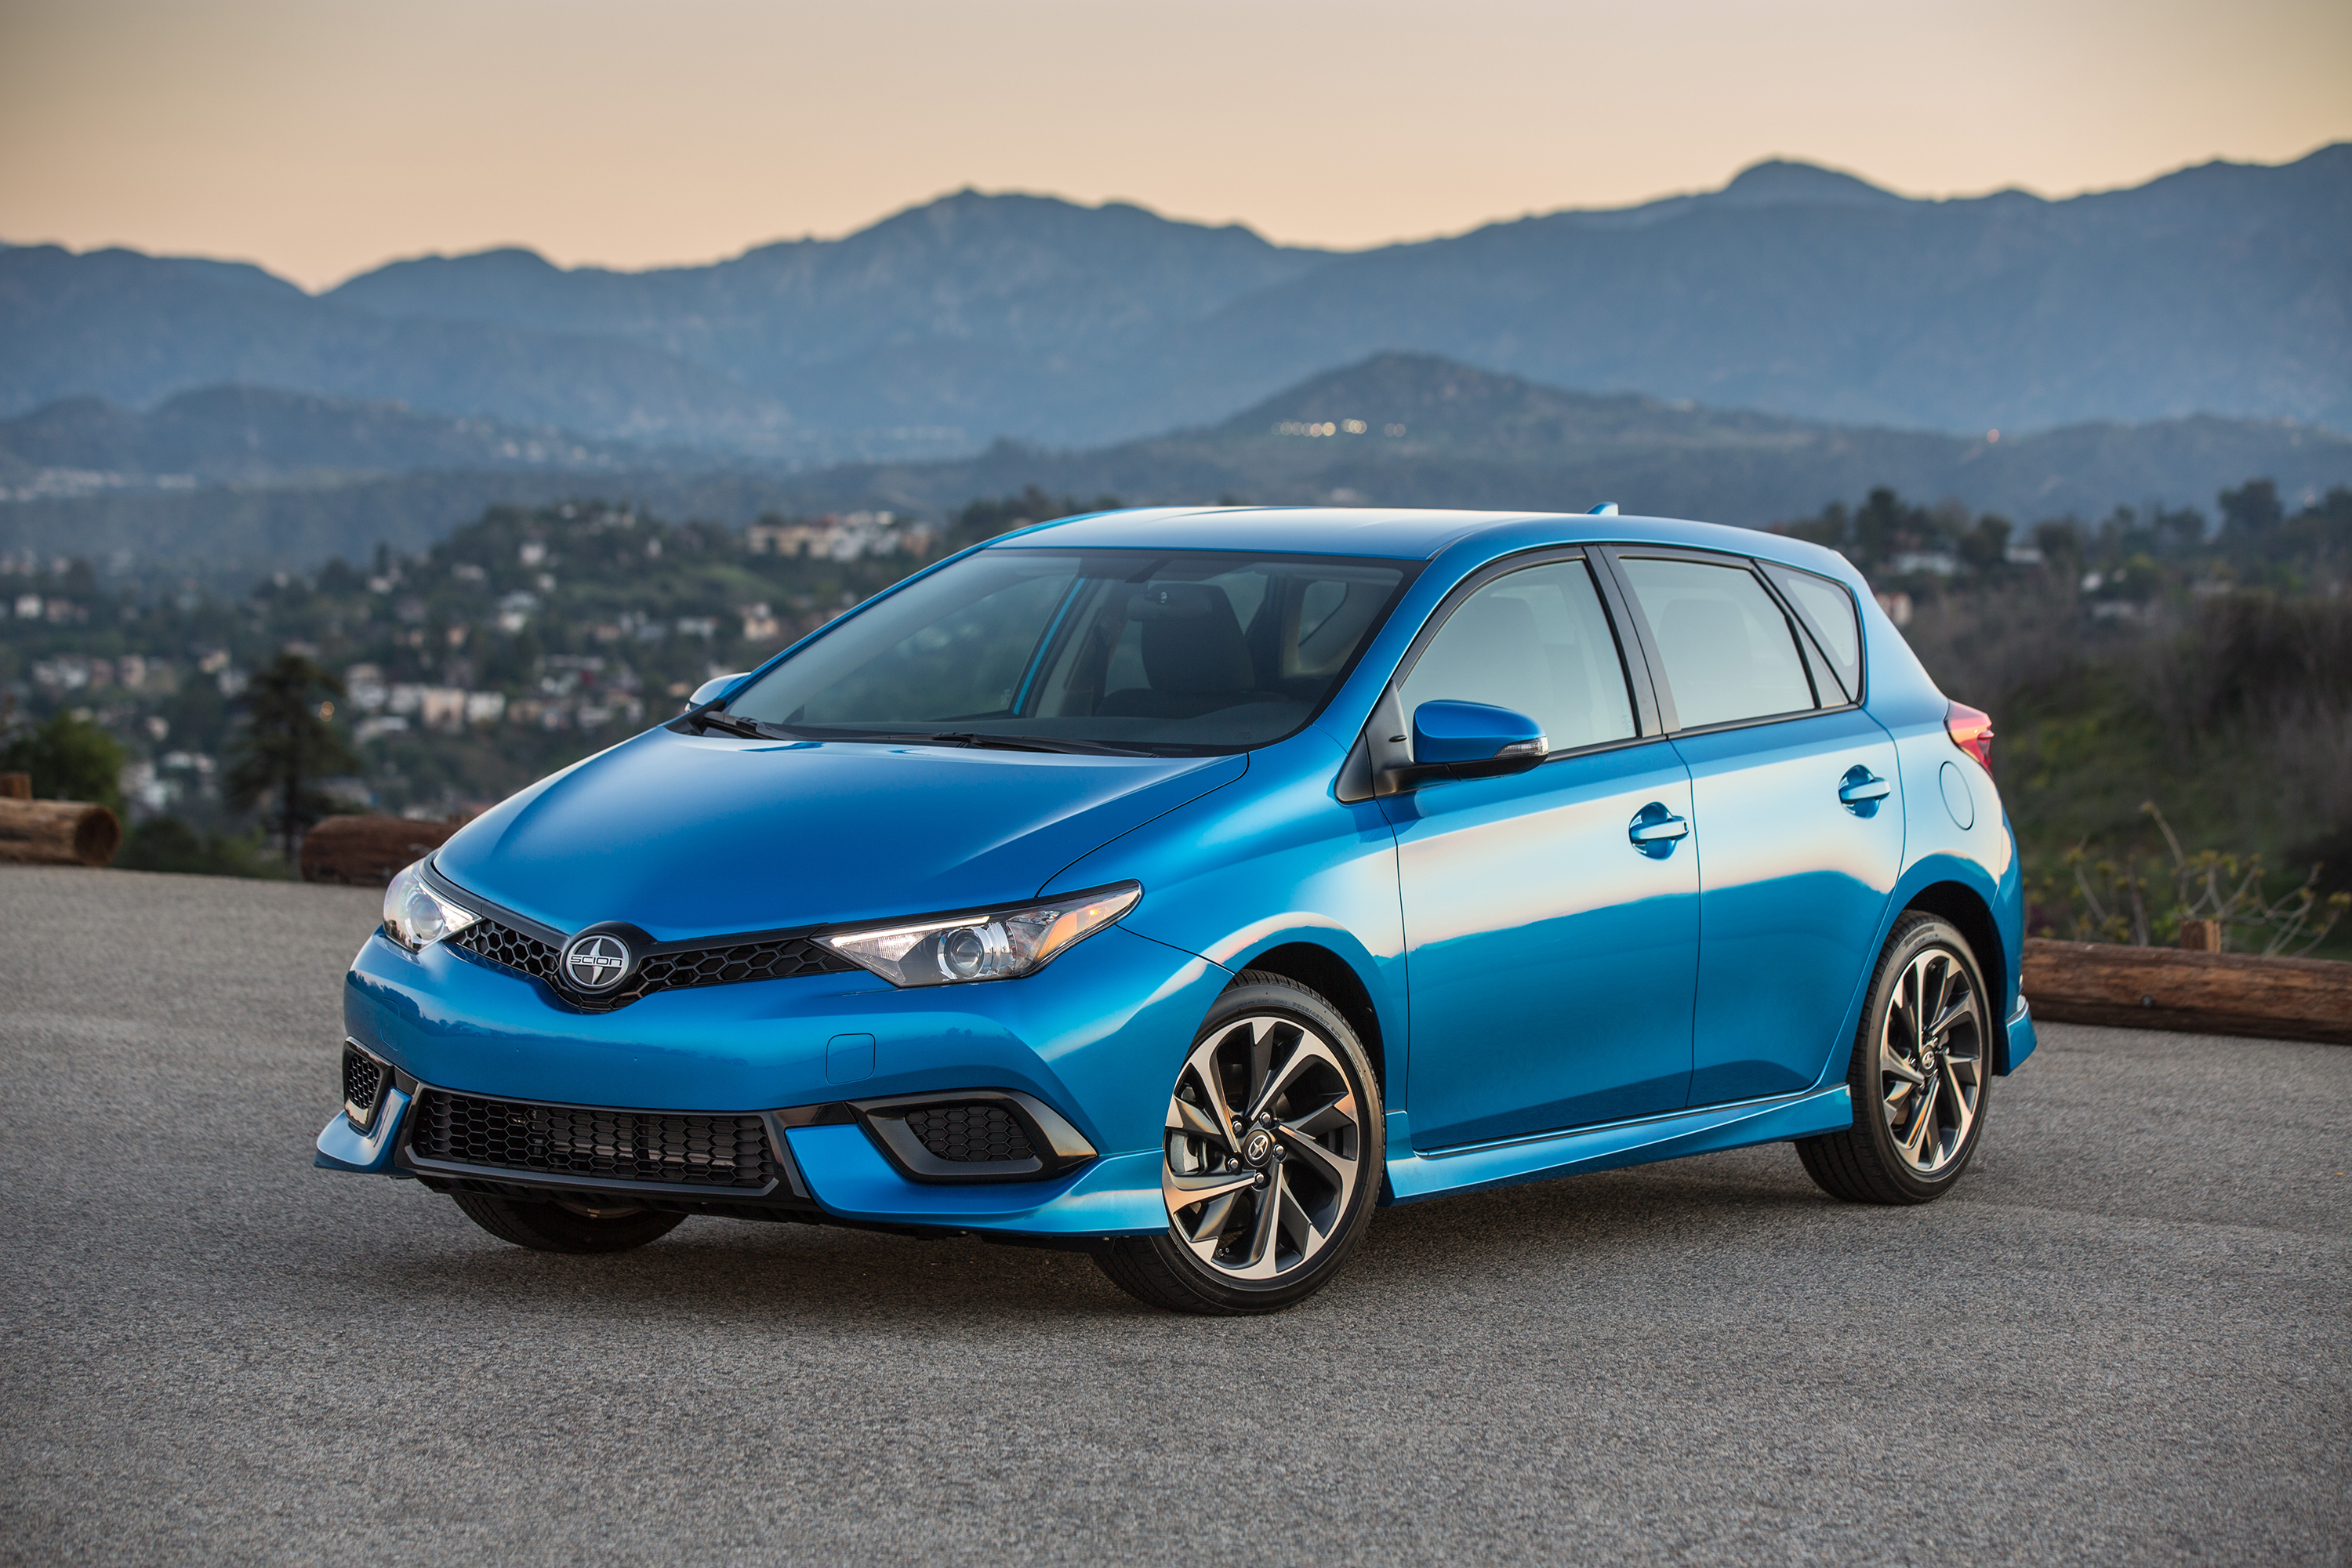 Five Doors, a Hatch and Room for Adventure: All-New 2016 Scion iM Ready to  Fire Up the Fun Hatch Segment - Toyota USA Newsroom